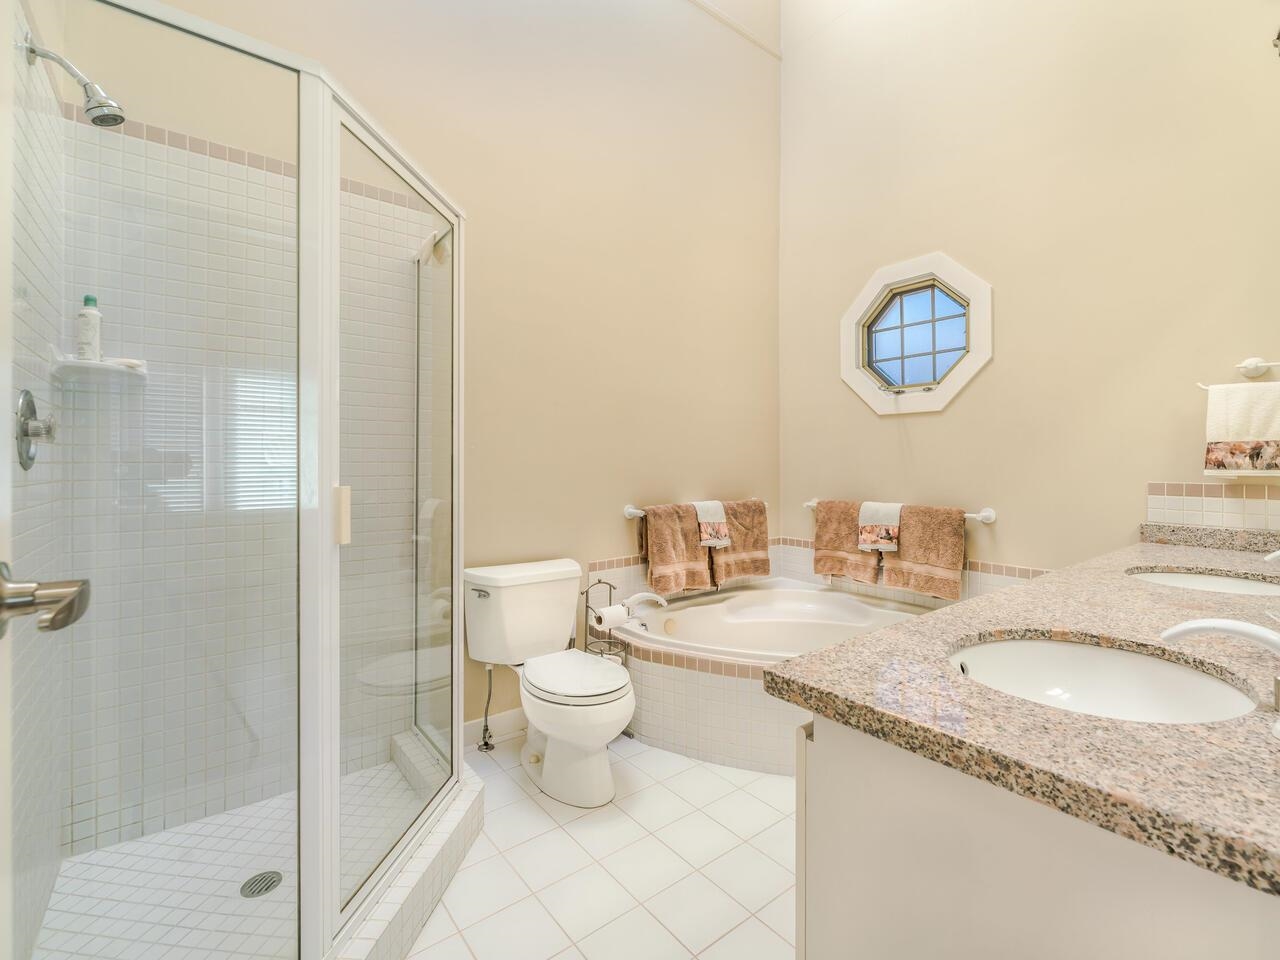 Soaker Tub, Vaulted Ceilings, Jetted Tub